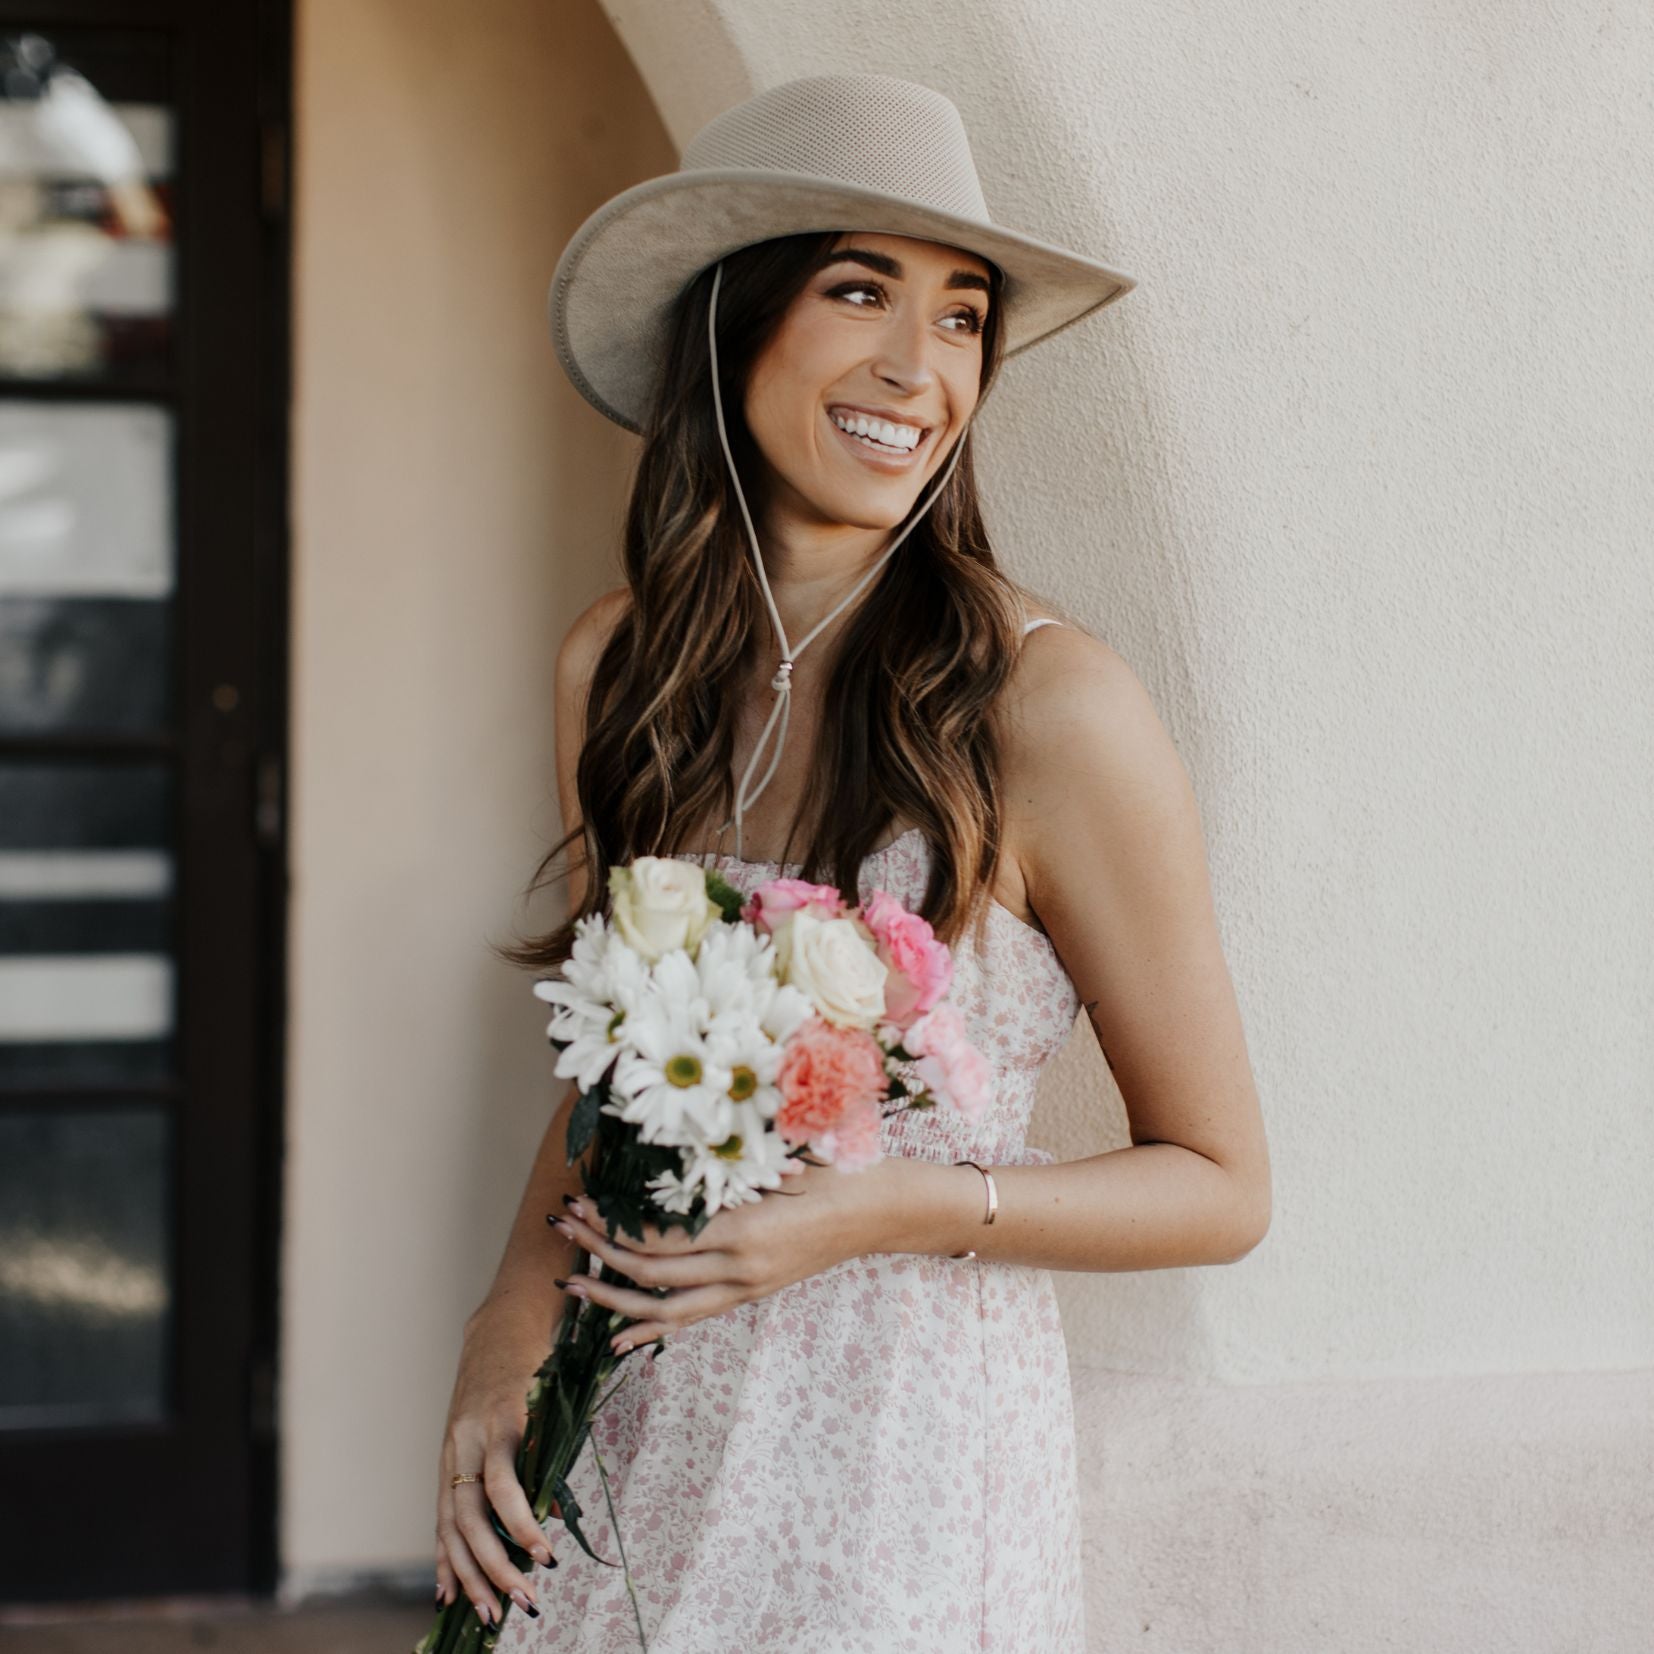 Woman holding flowers against wall while wearing the Breeze Latte sun hat